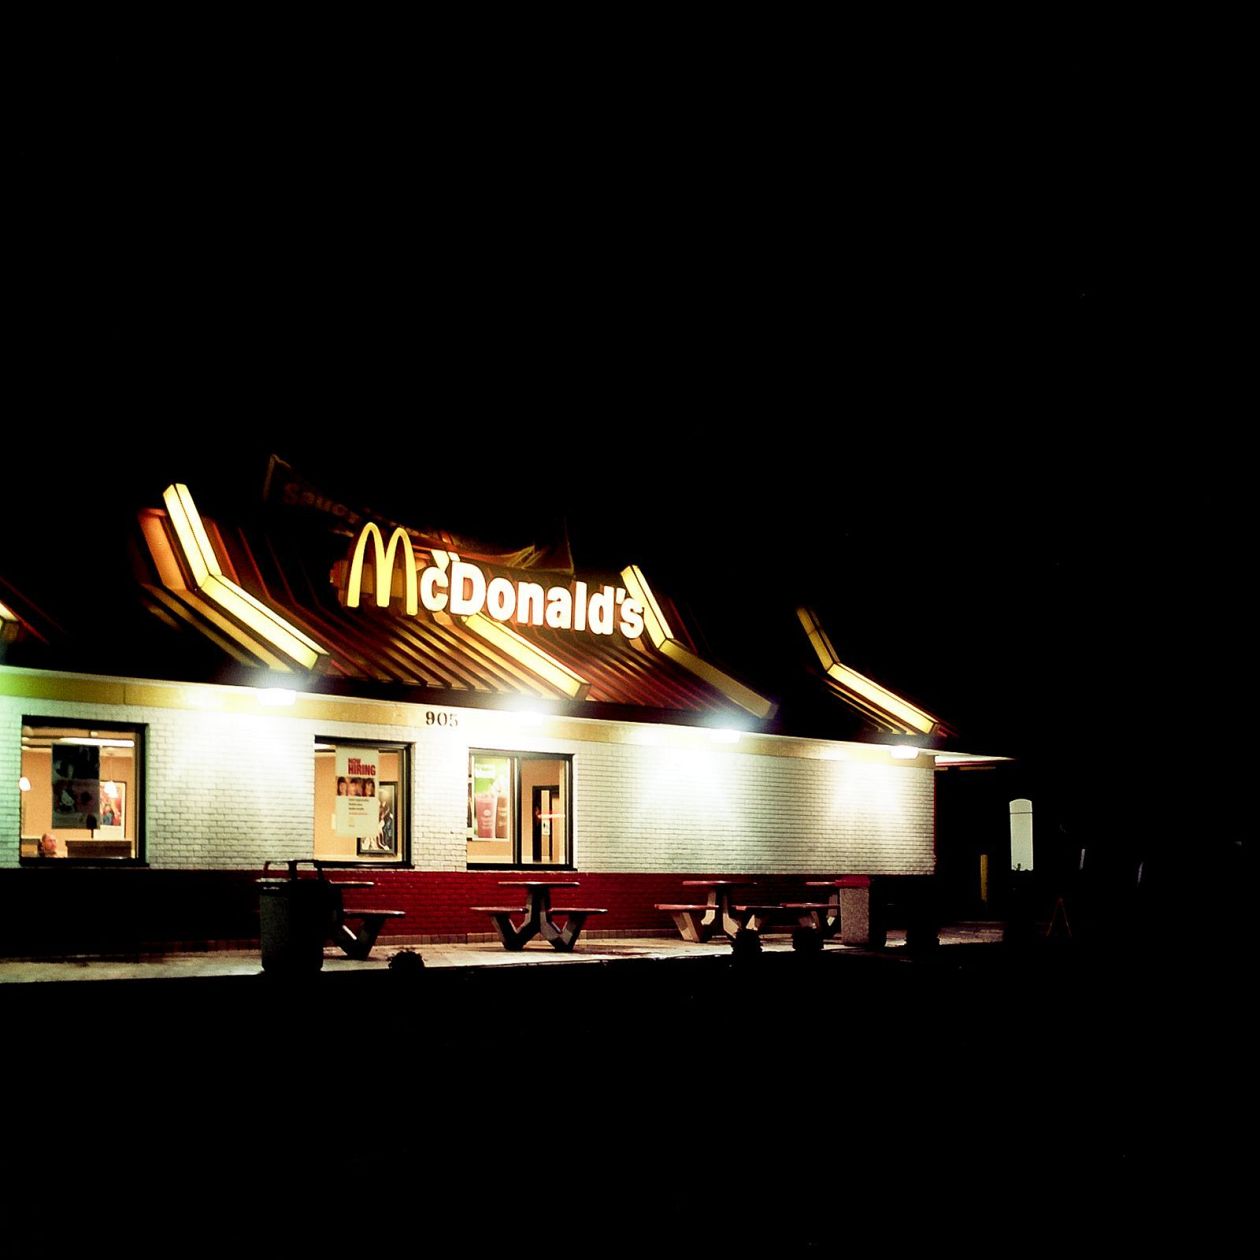 Night view of a McDonalds restaurant in Memphis